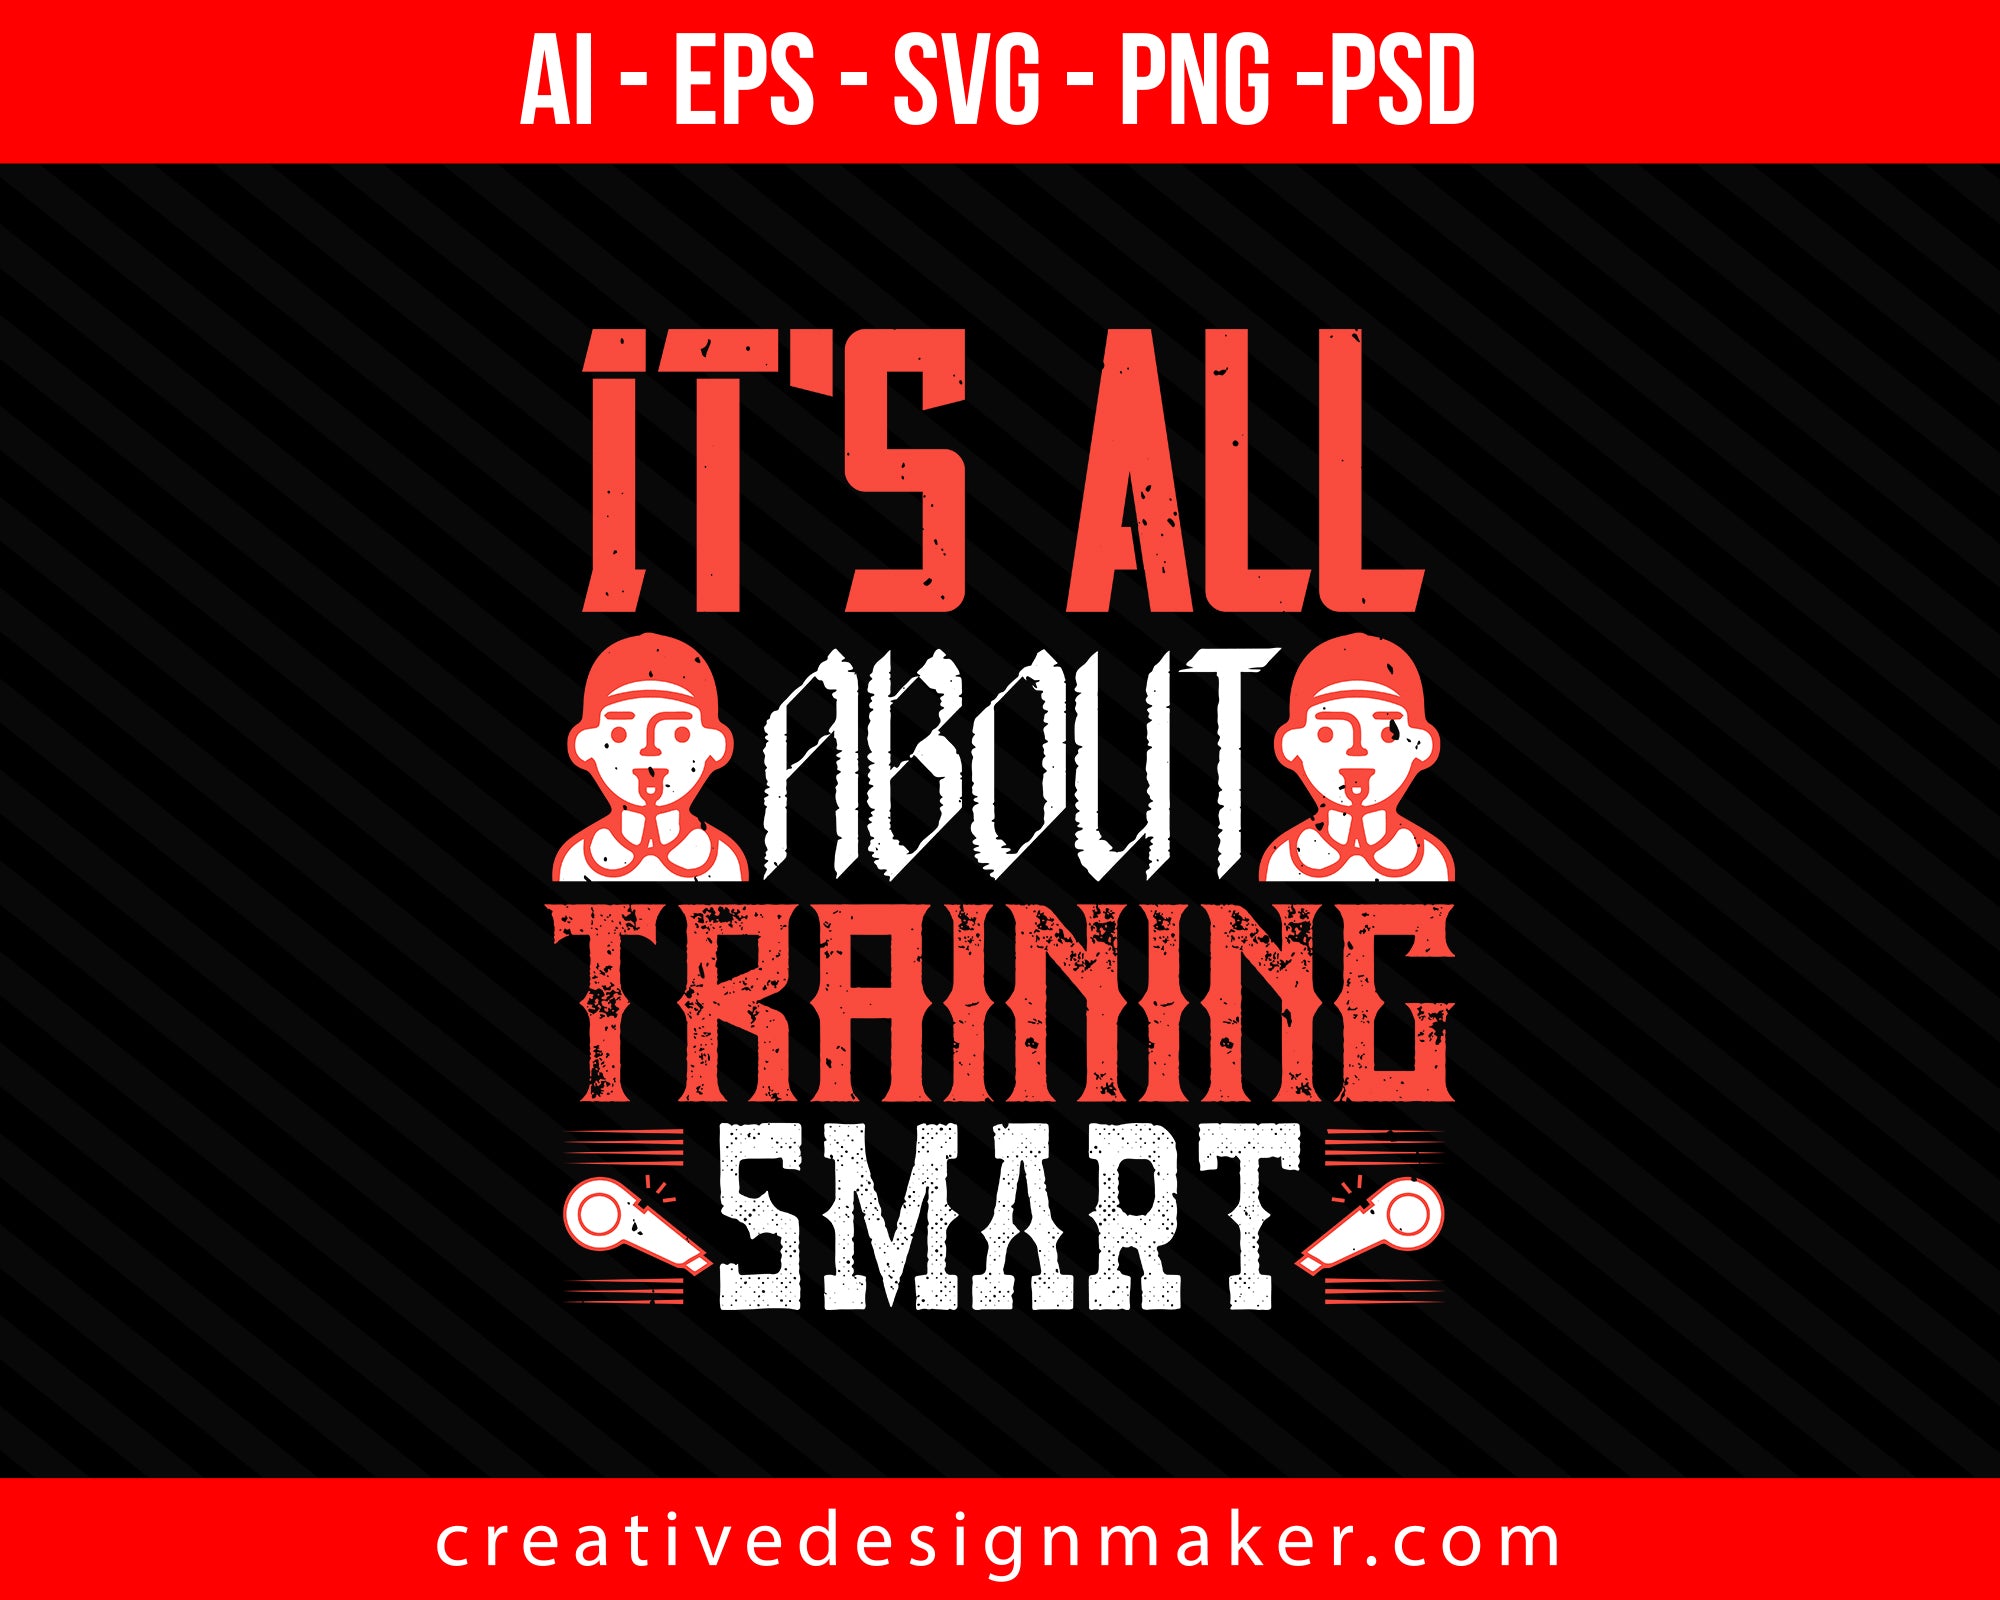 It's all about training smart Coaching Print Ready Editable T-Shirt SVG Design!